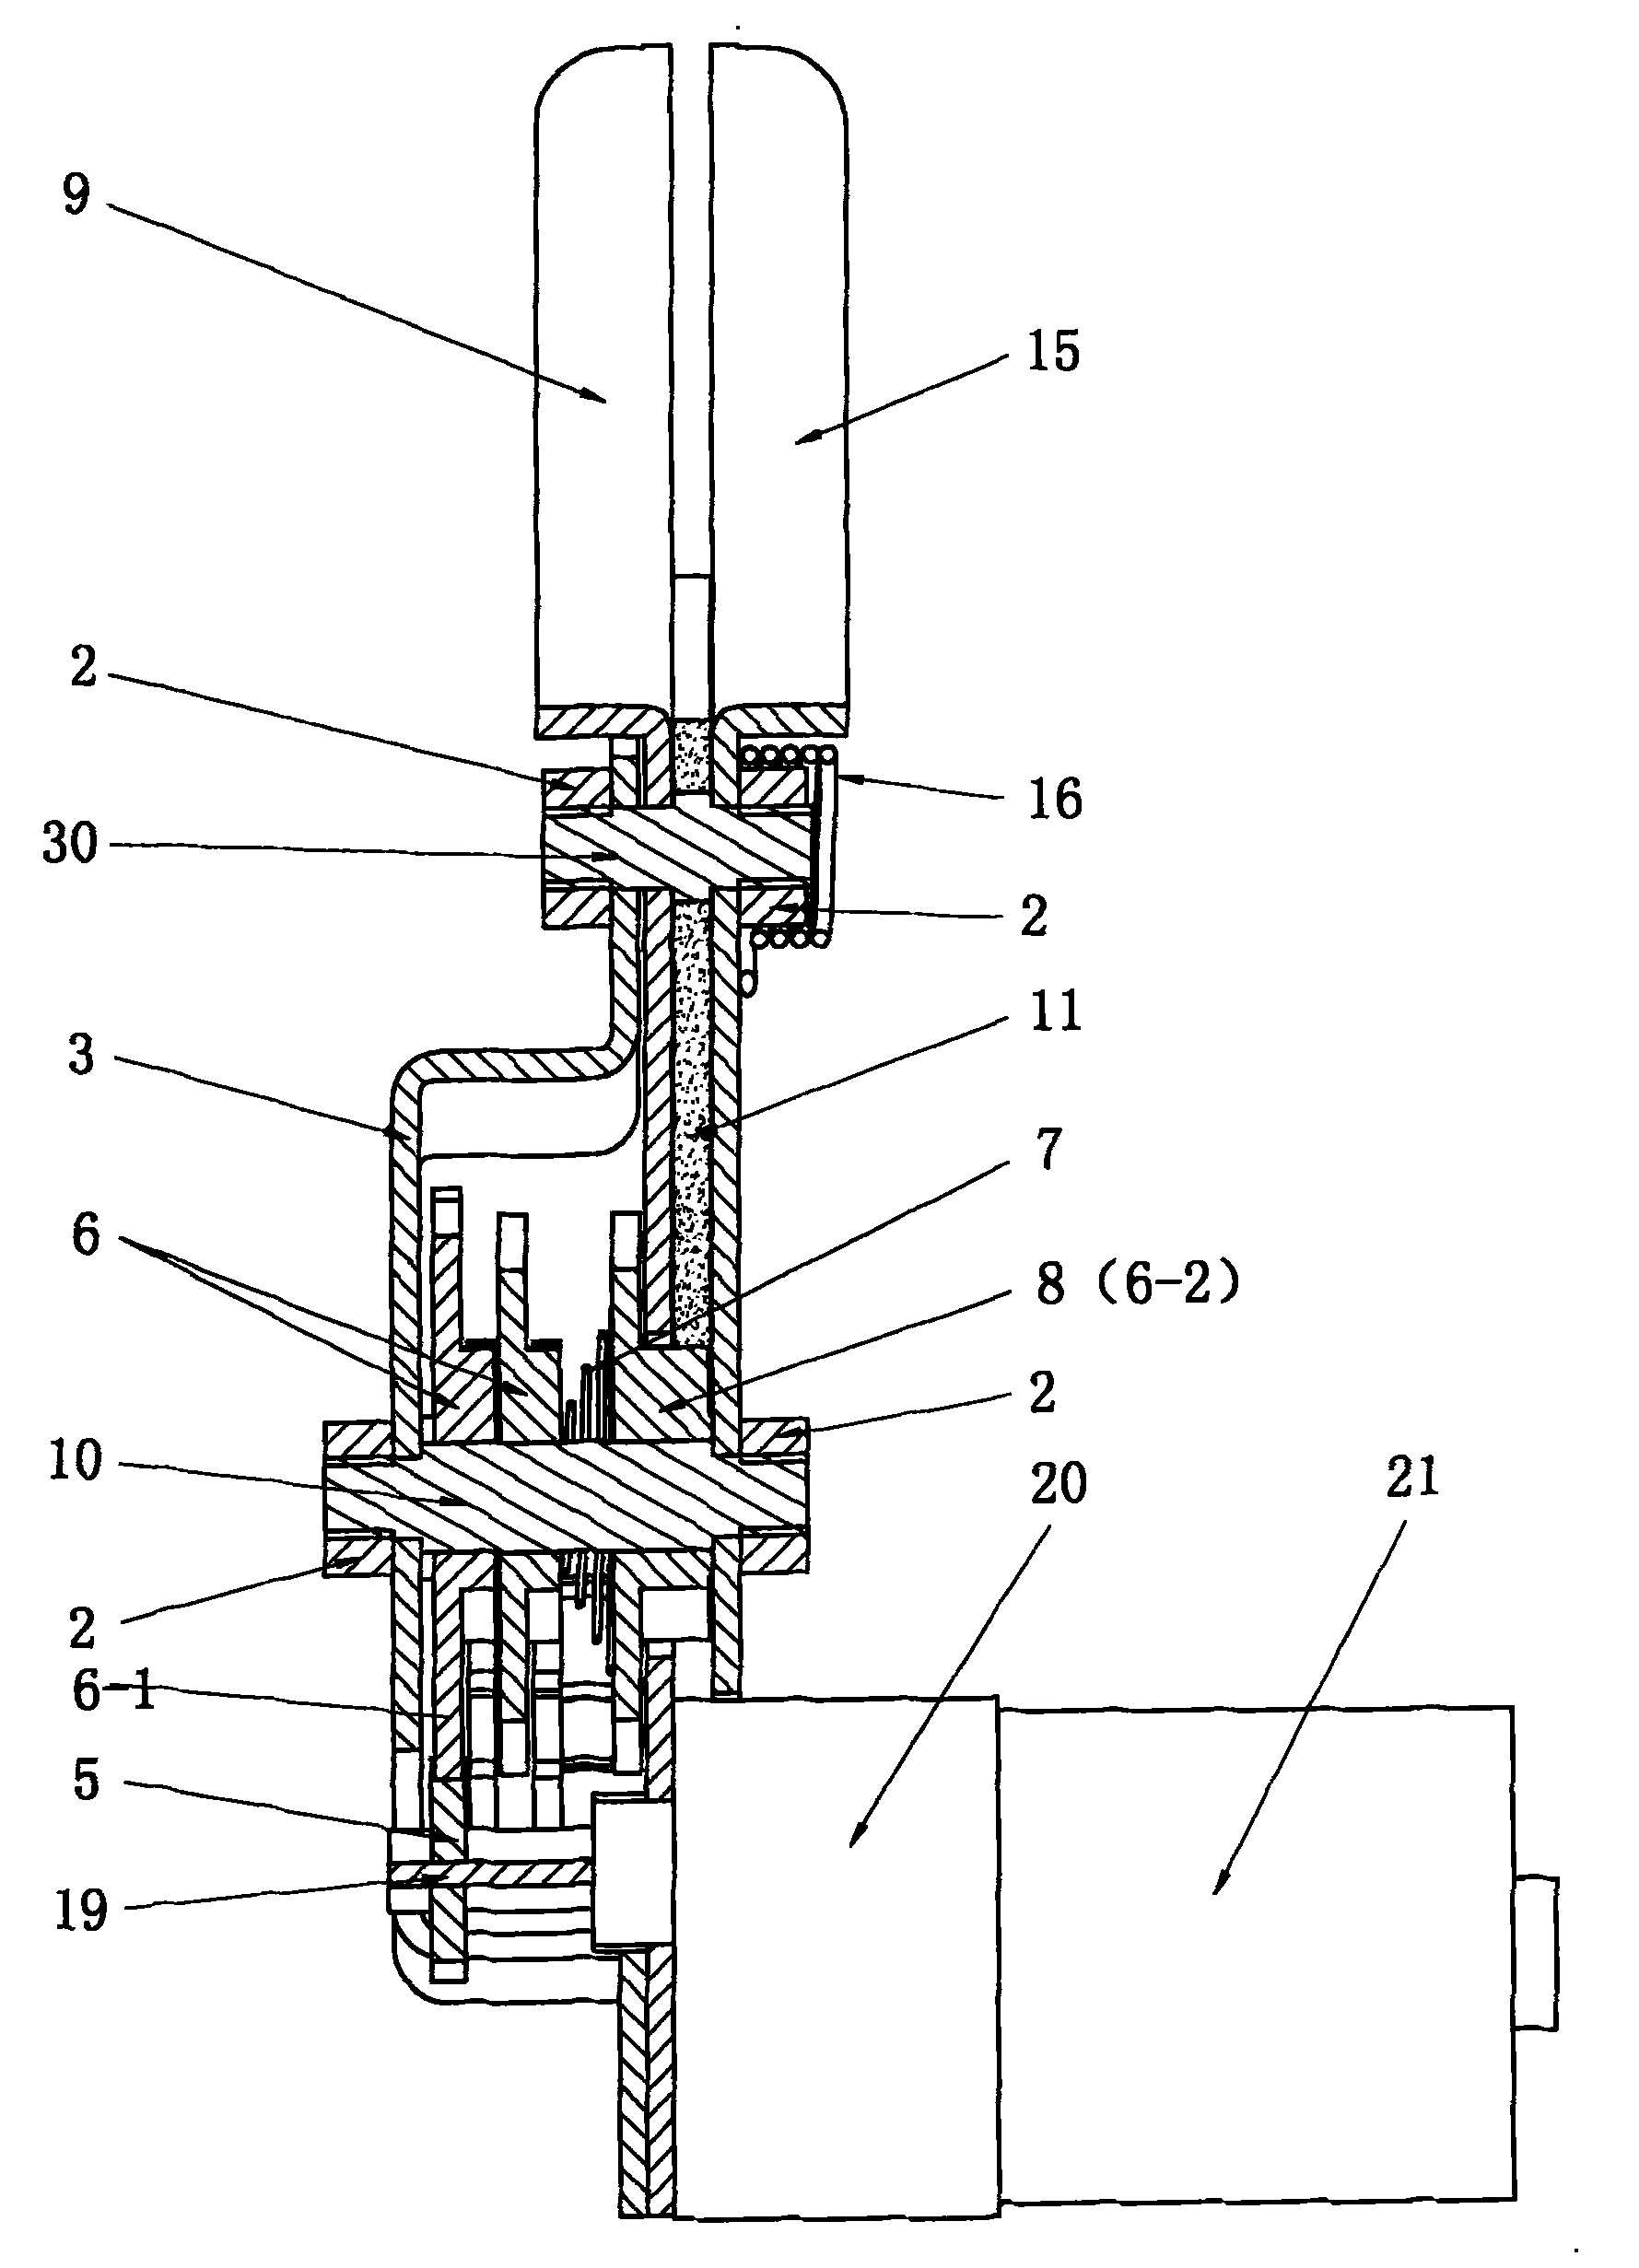 Quick retracting device in plastic tube cutting tool